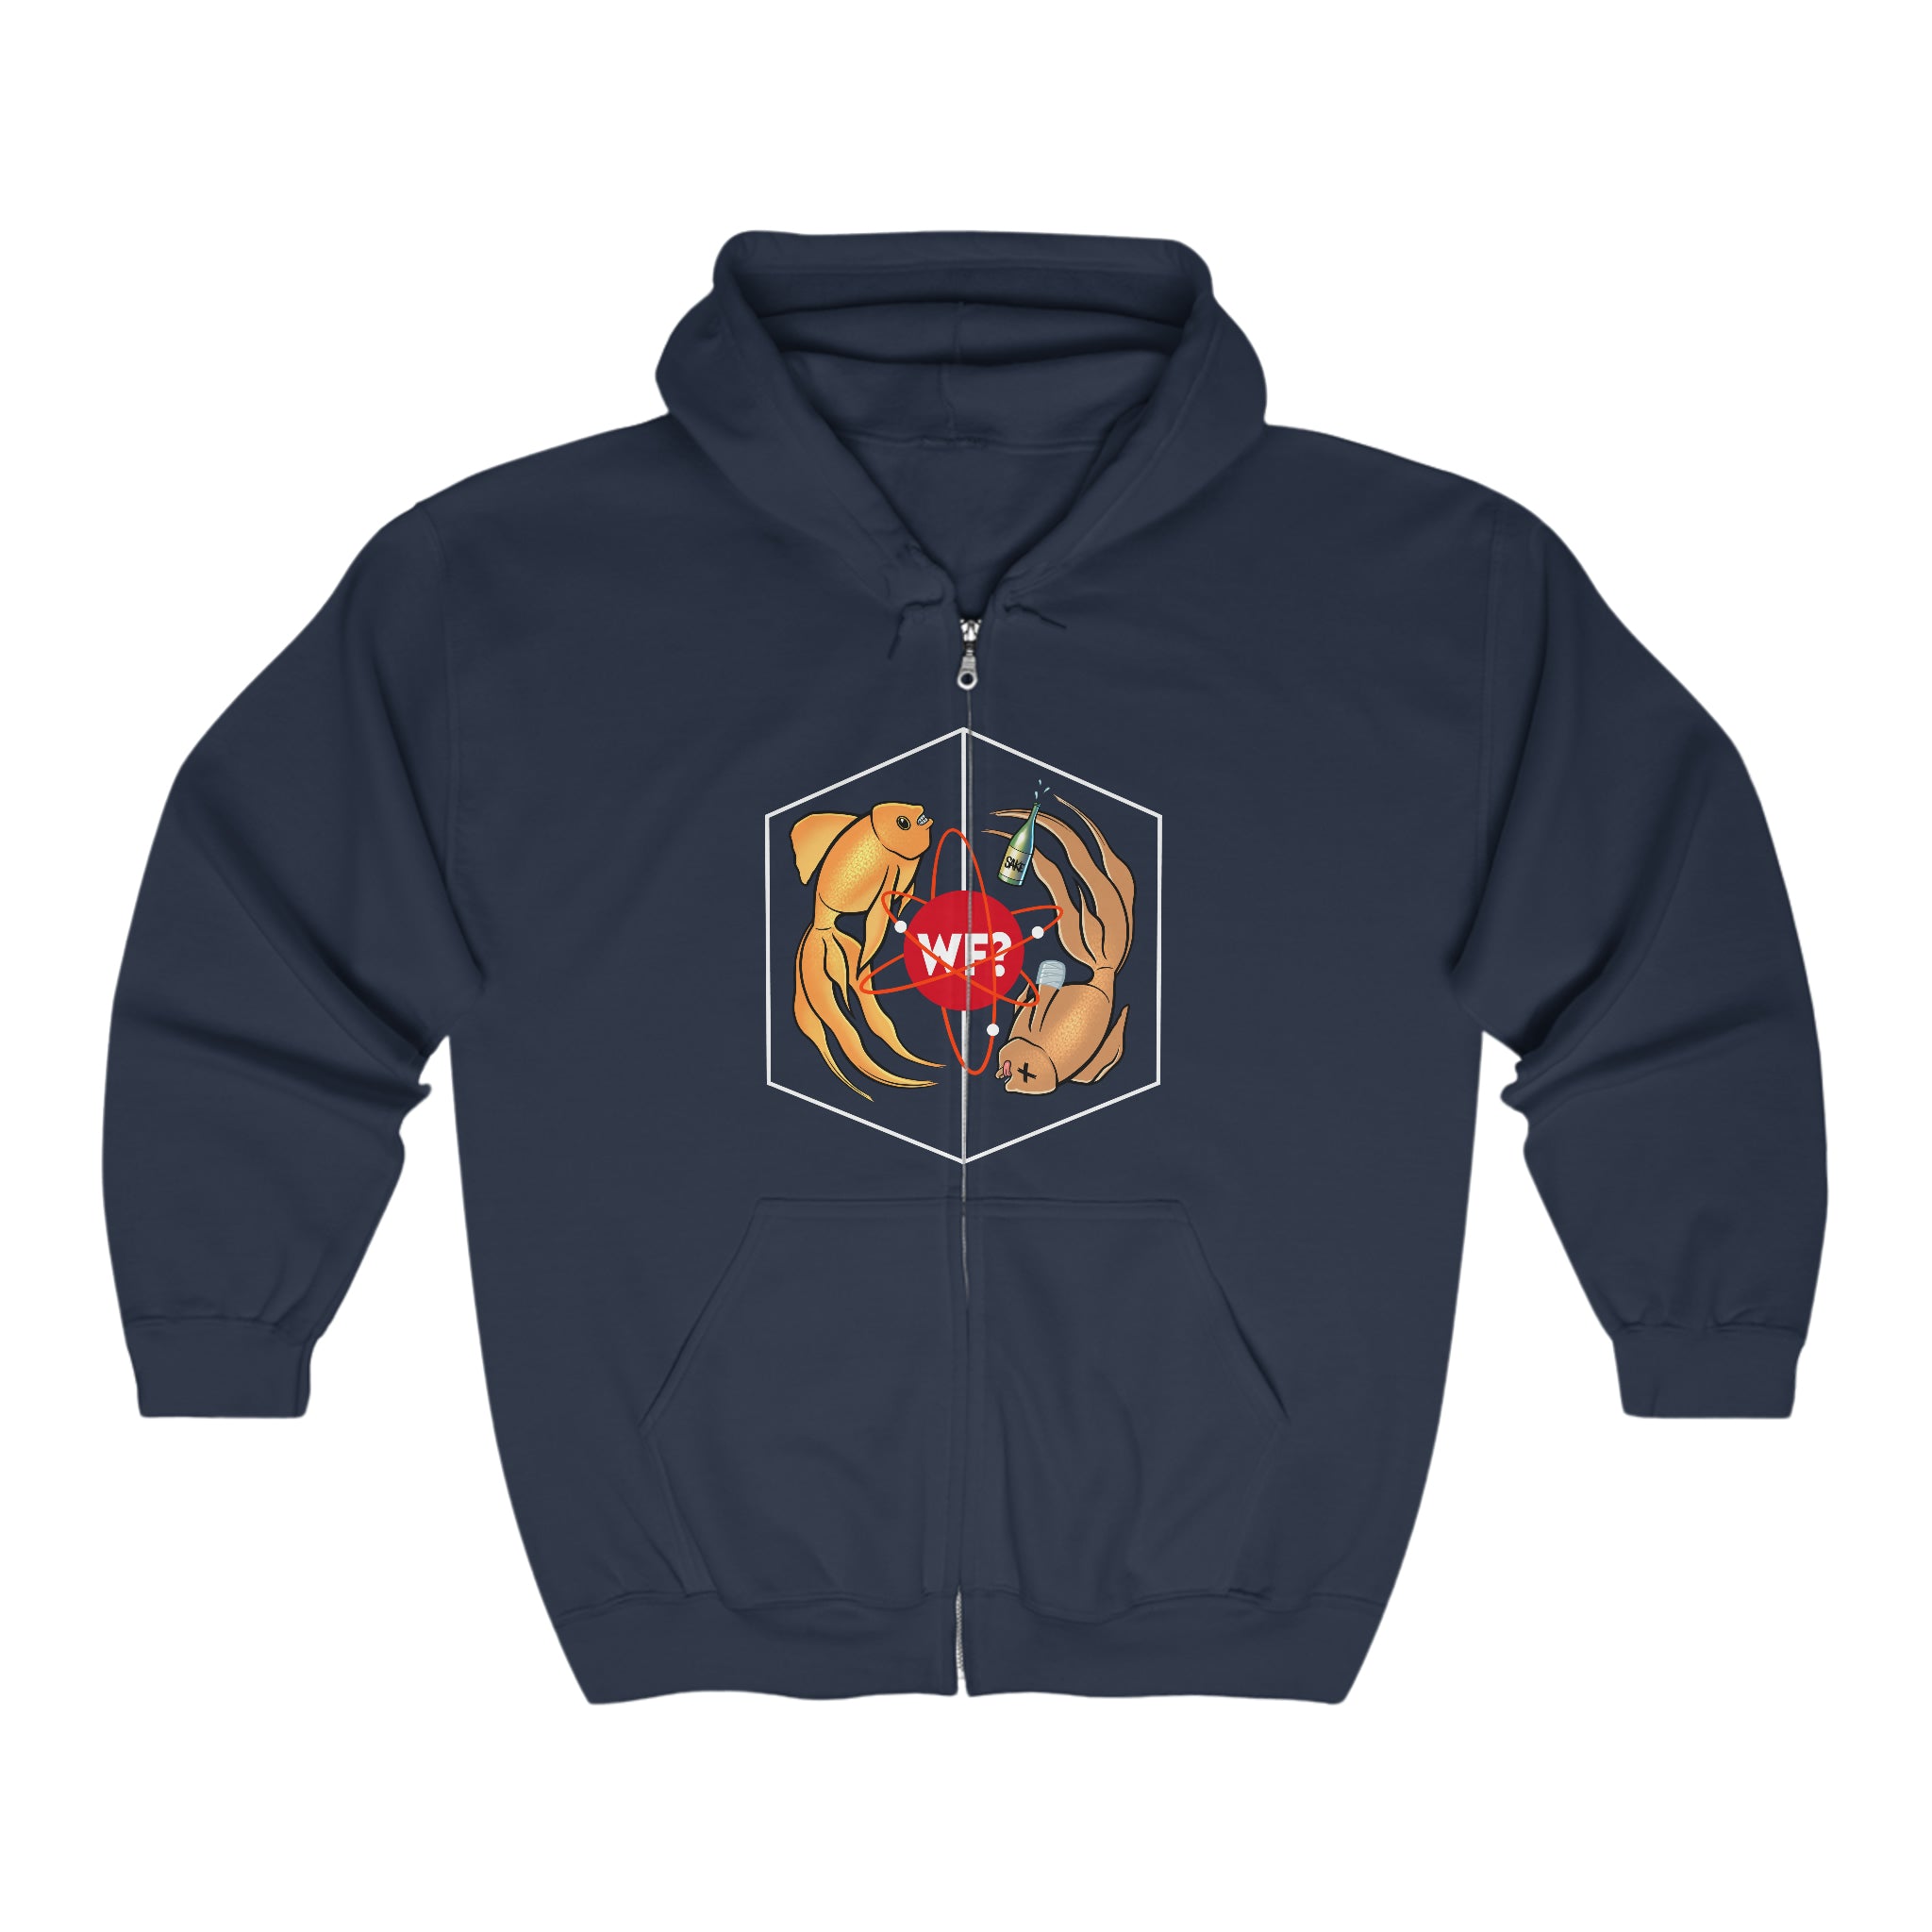 Buy navy 9/14 Many Worlds Limited Full Zip Hoodie